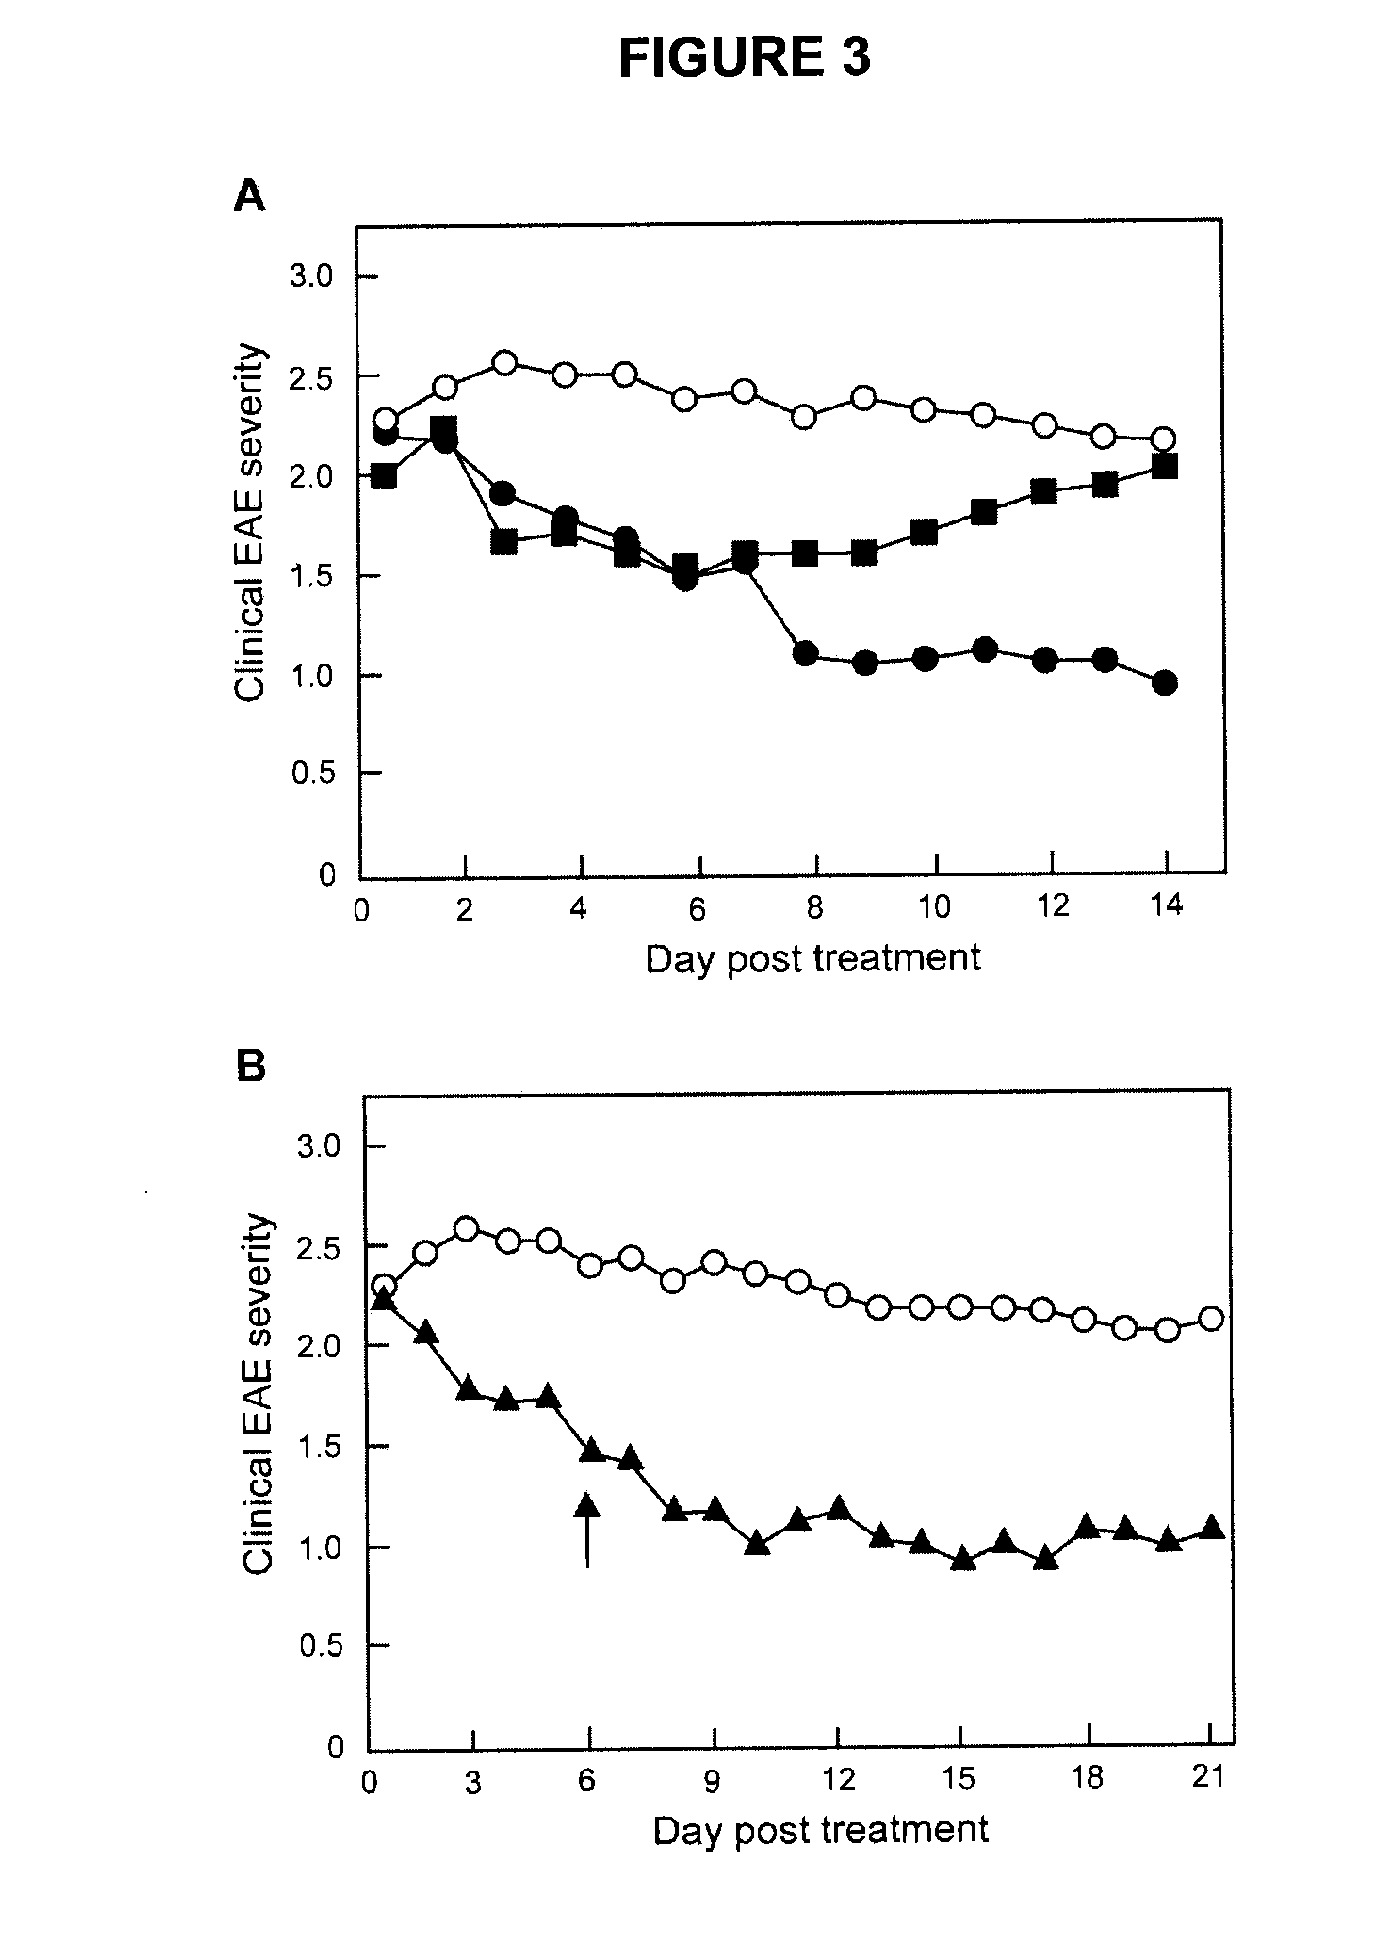 Methods of treating multiple sclerosis by administering pulse dose calcitriol